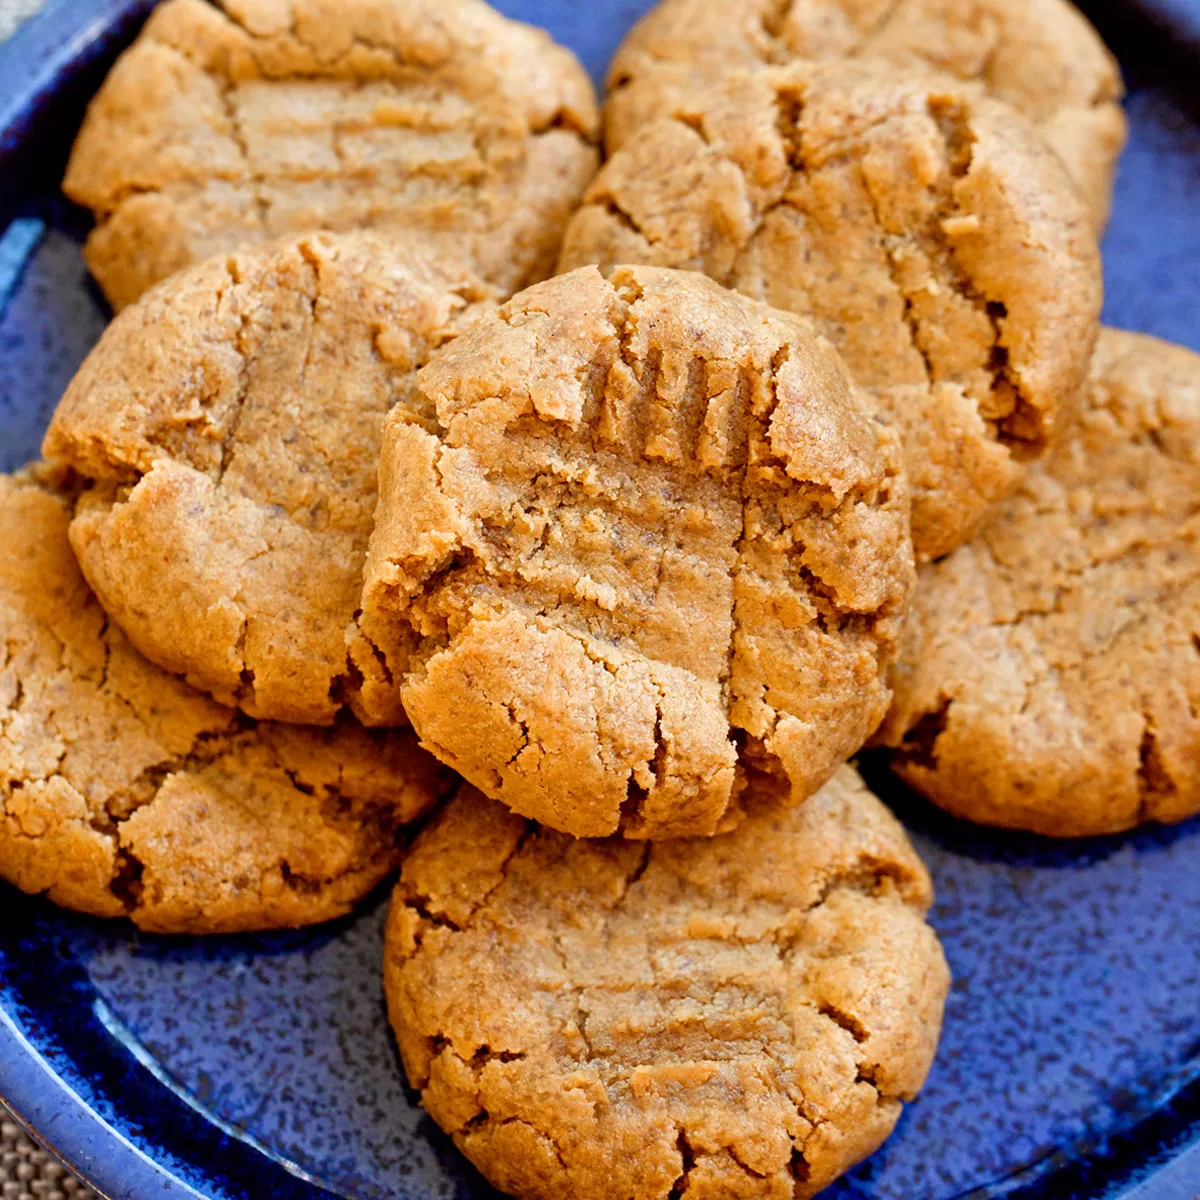 Vegan Peanut Butter Cookies - They MELT in your mouth!